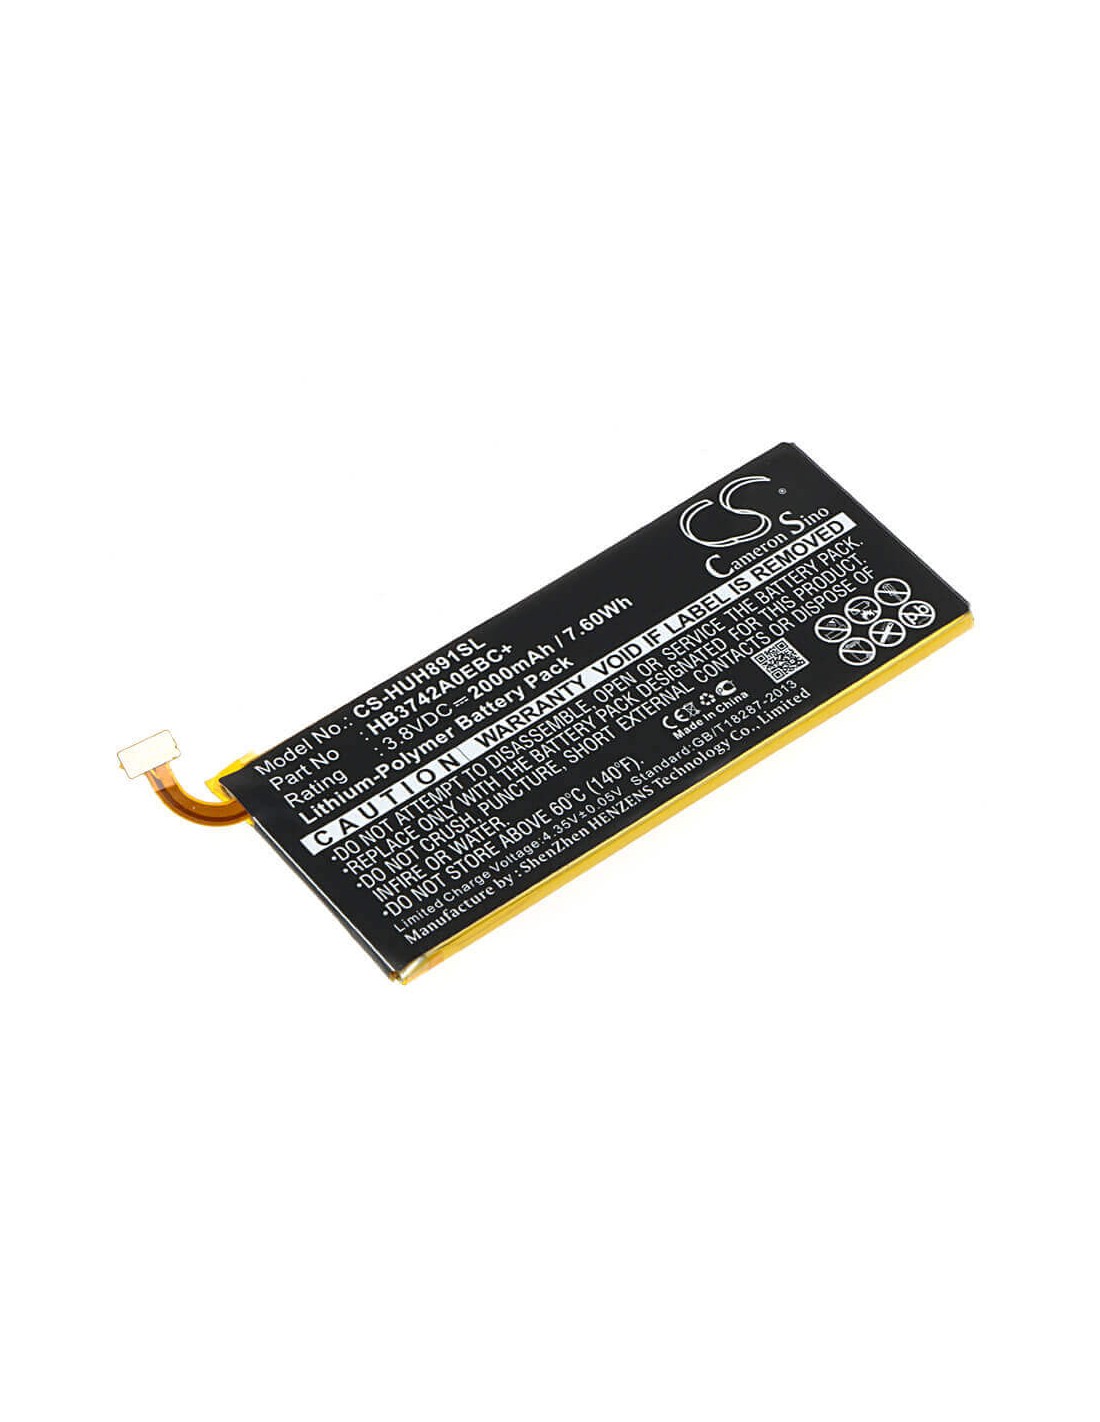 Battery for Huawei H891L, Pronto, Ascend SnapTo 3.8V, 2000mAh - 7.60Wh